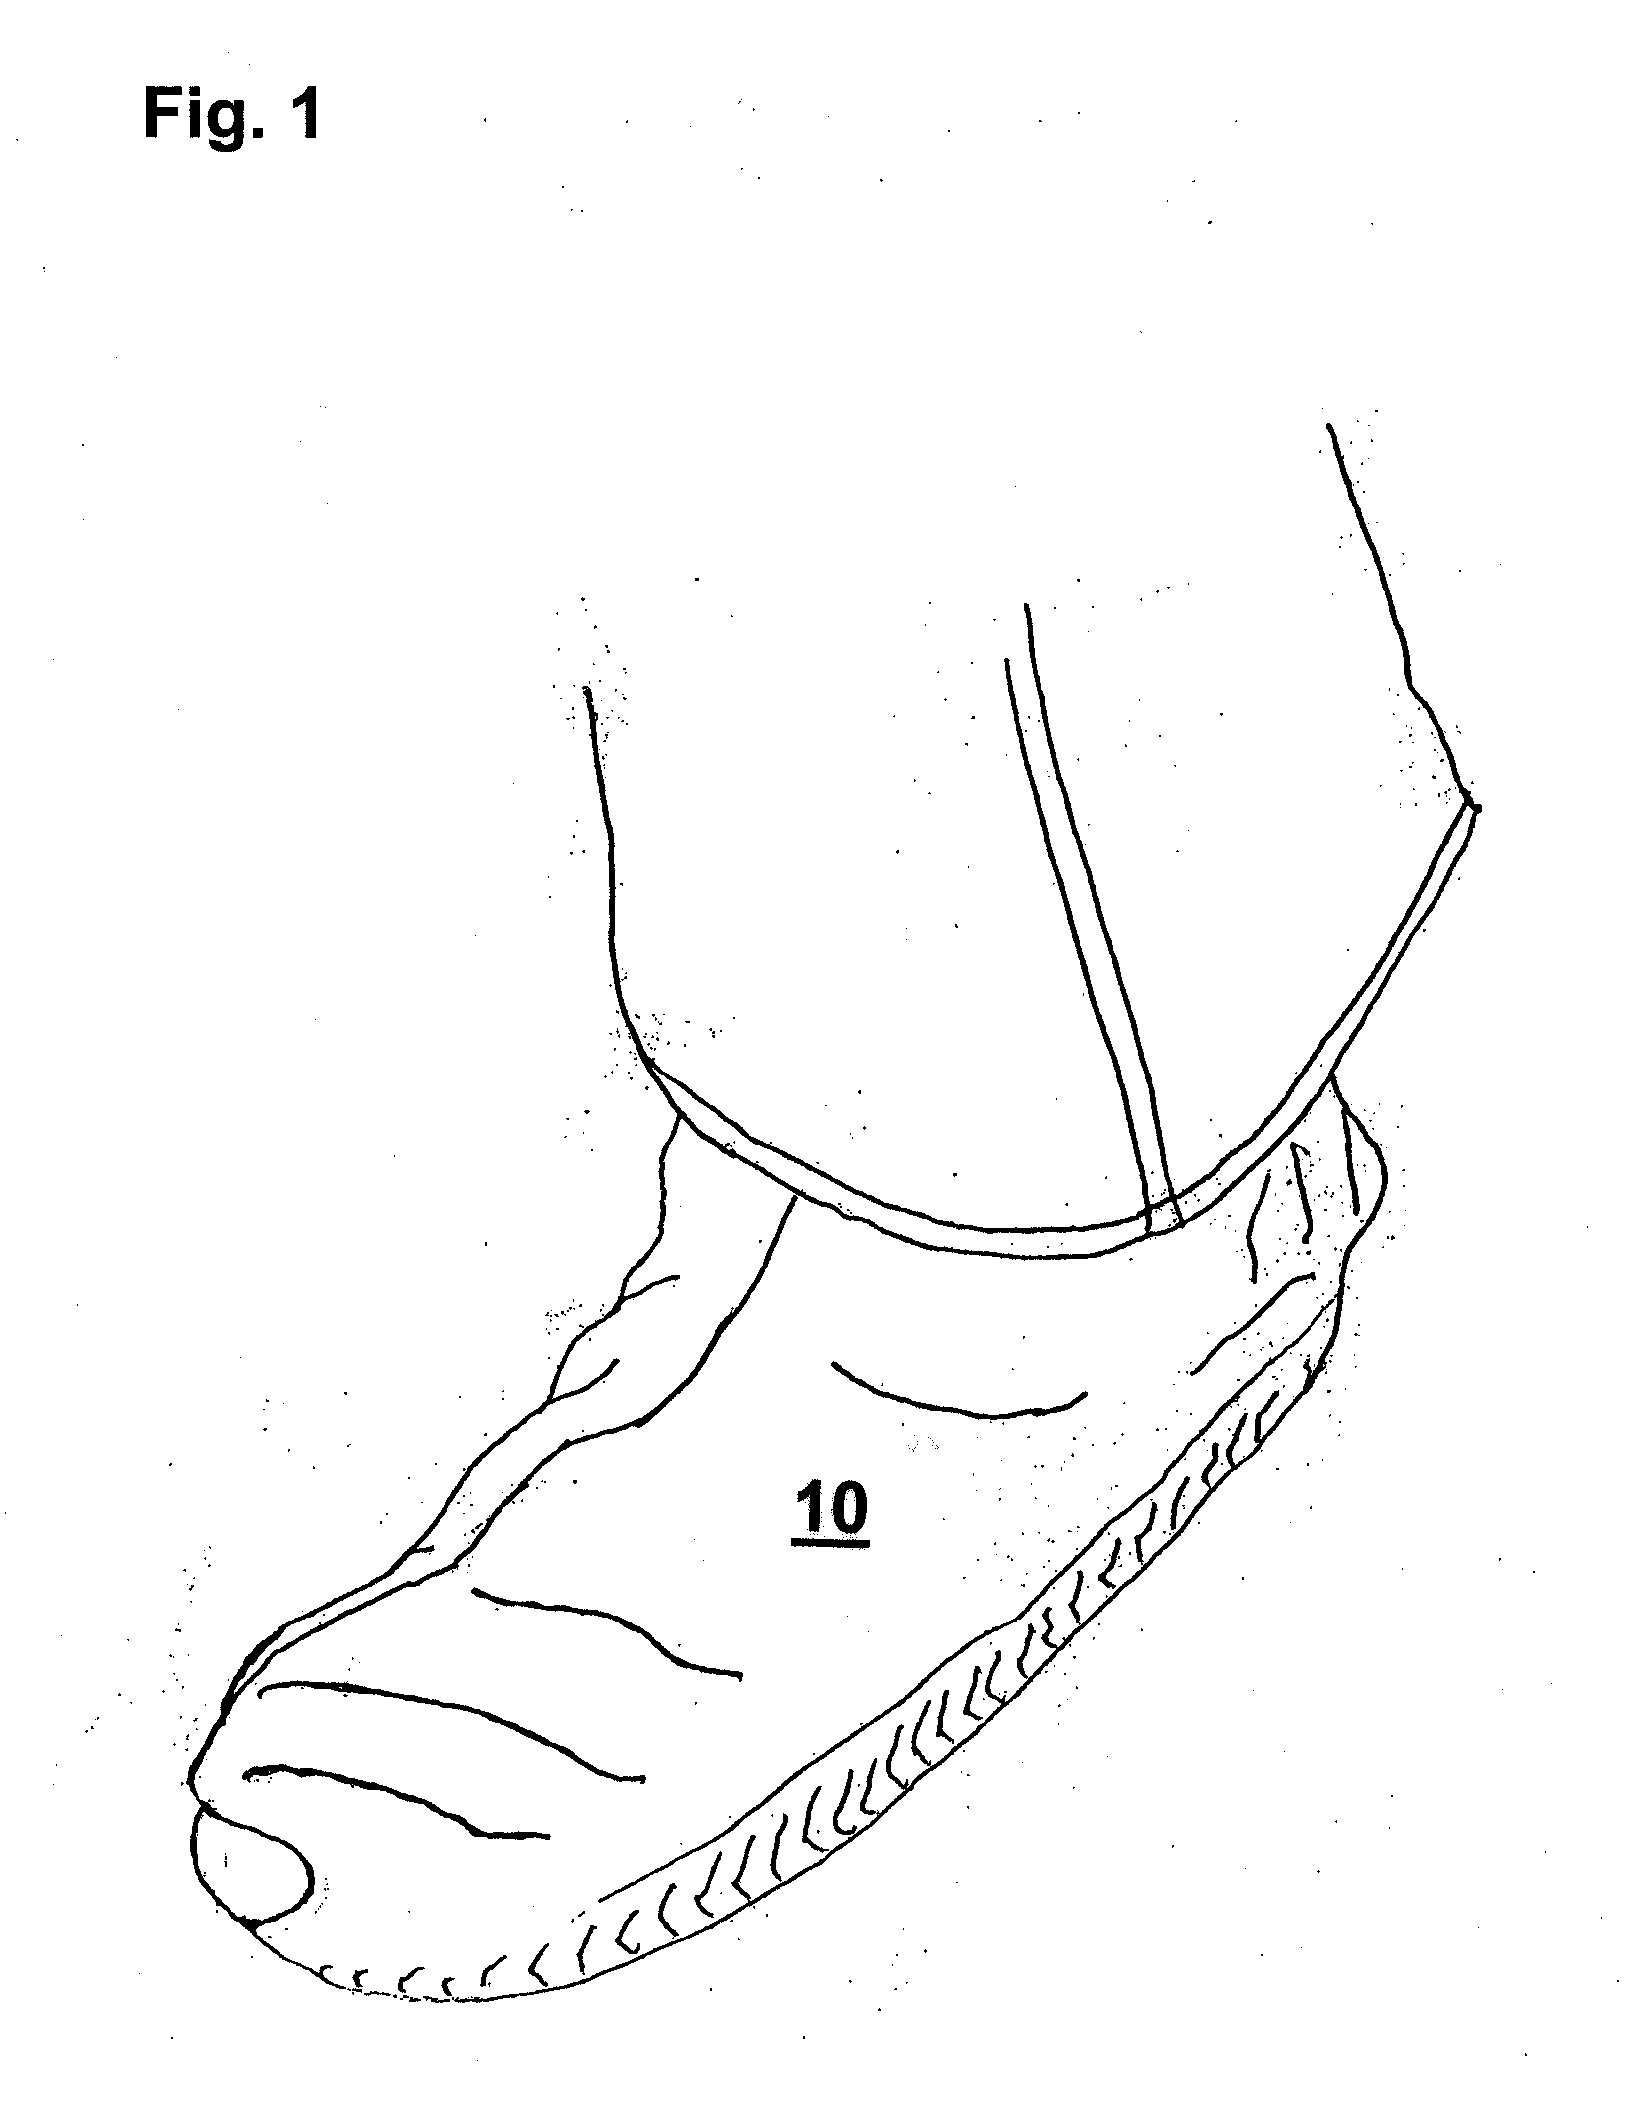 Footwear cover with scent-suppressing carbon additive